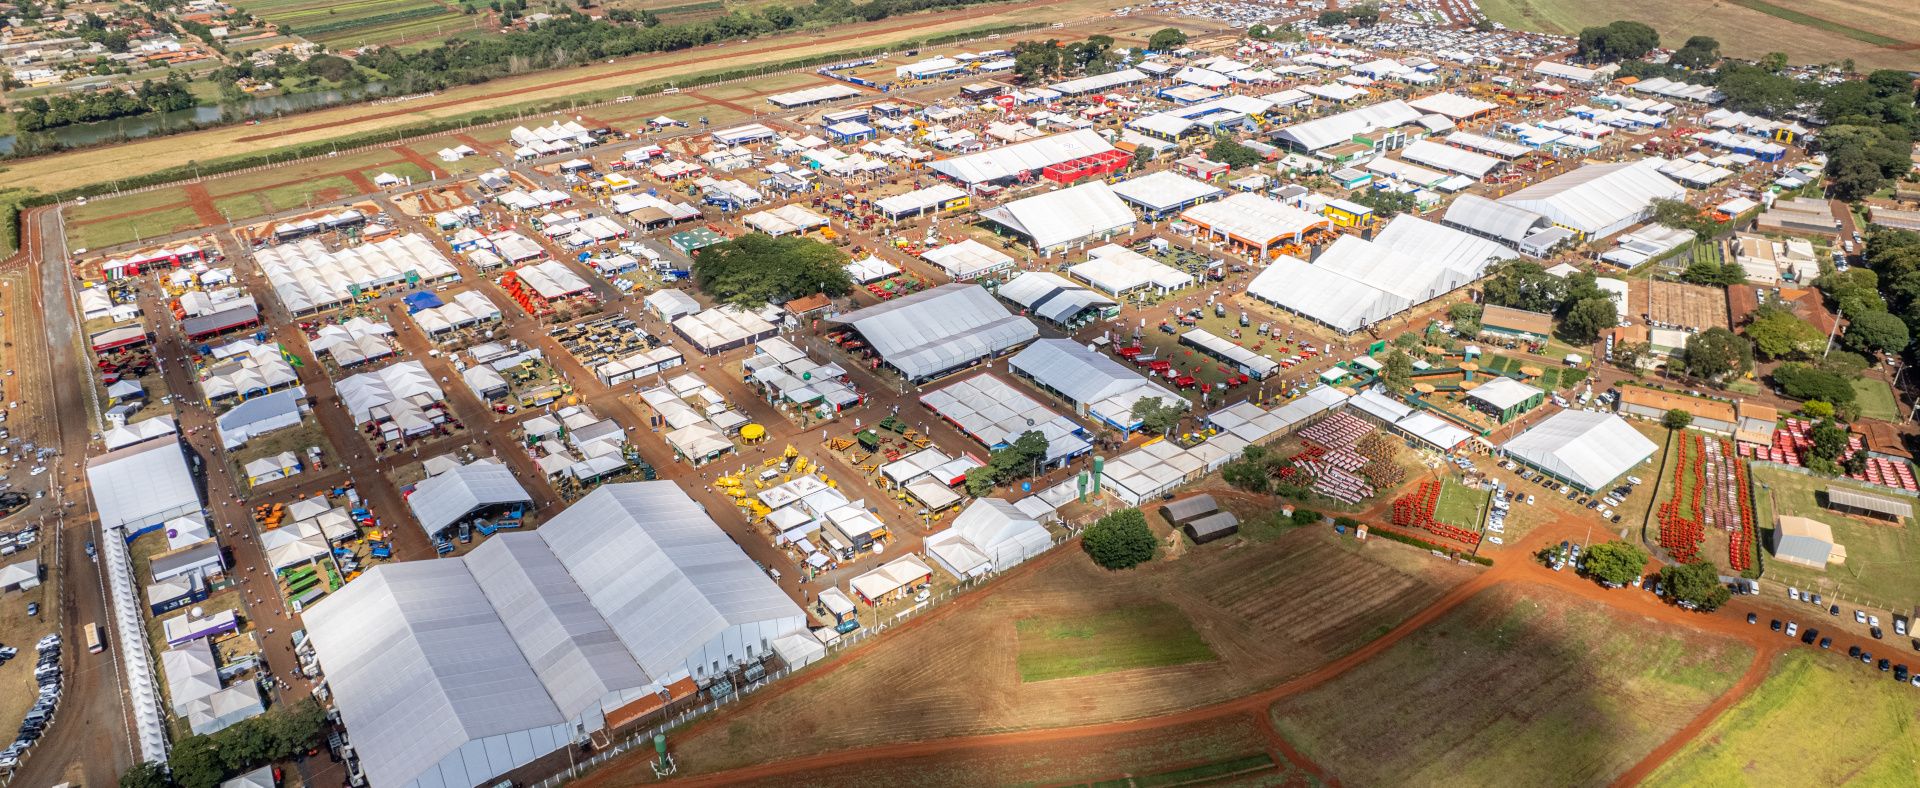 Farm show using steel framed agricultural buildings